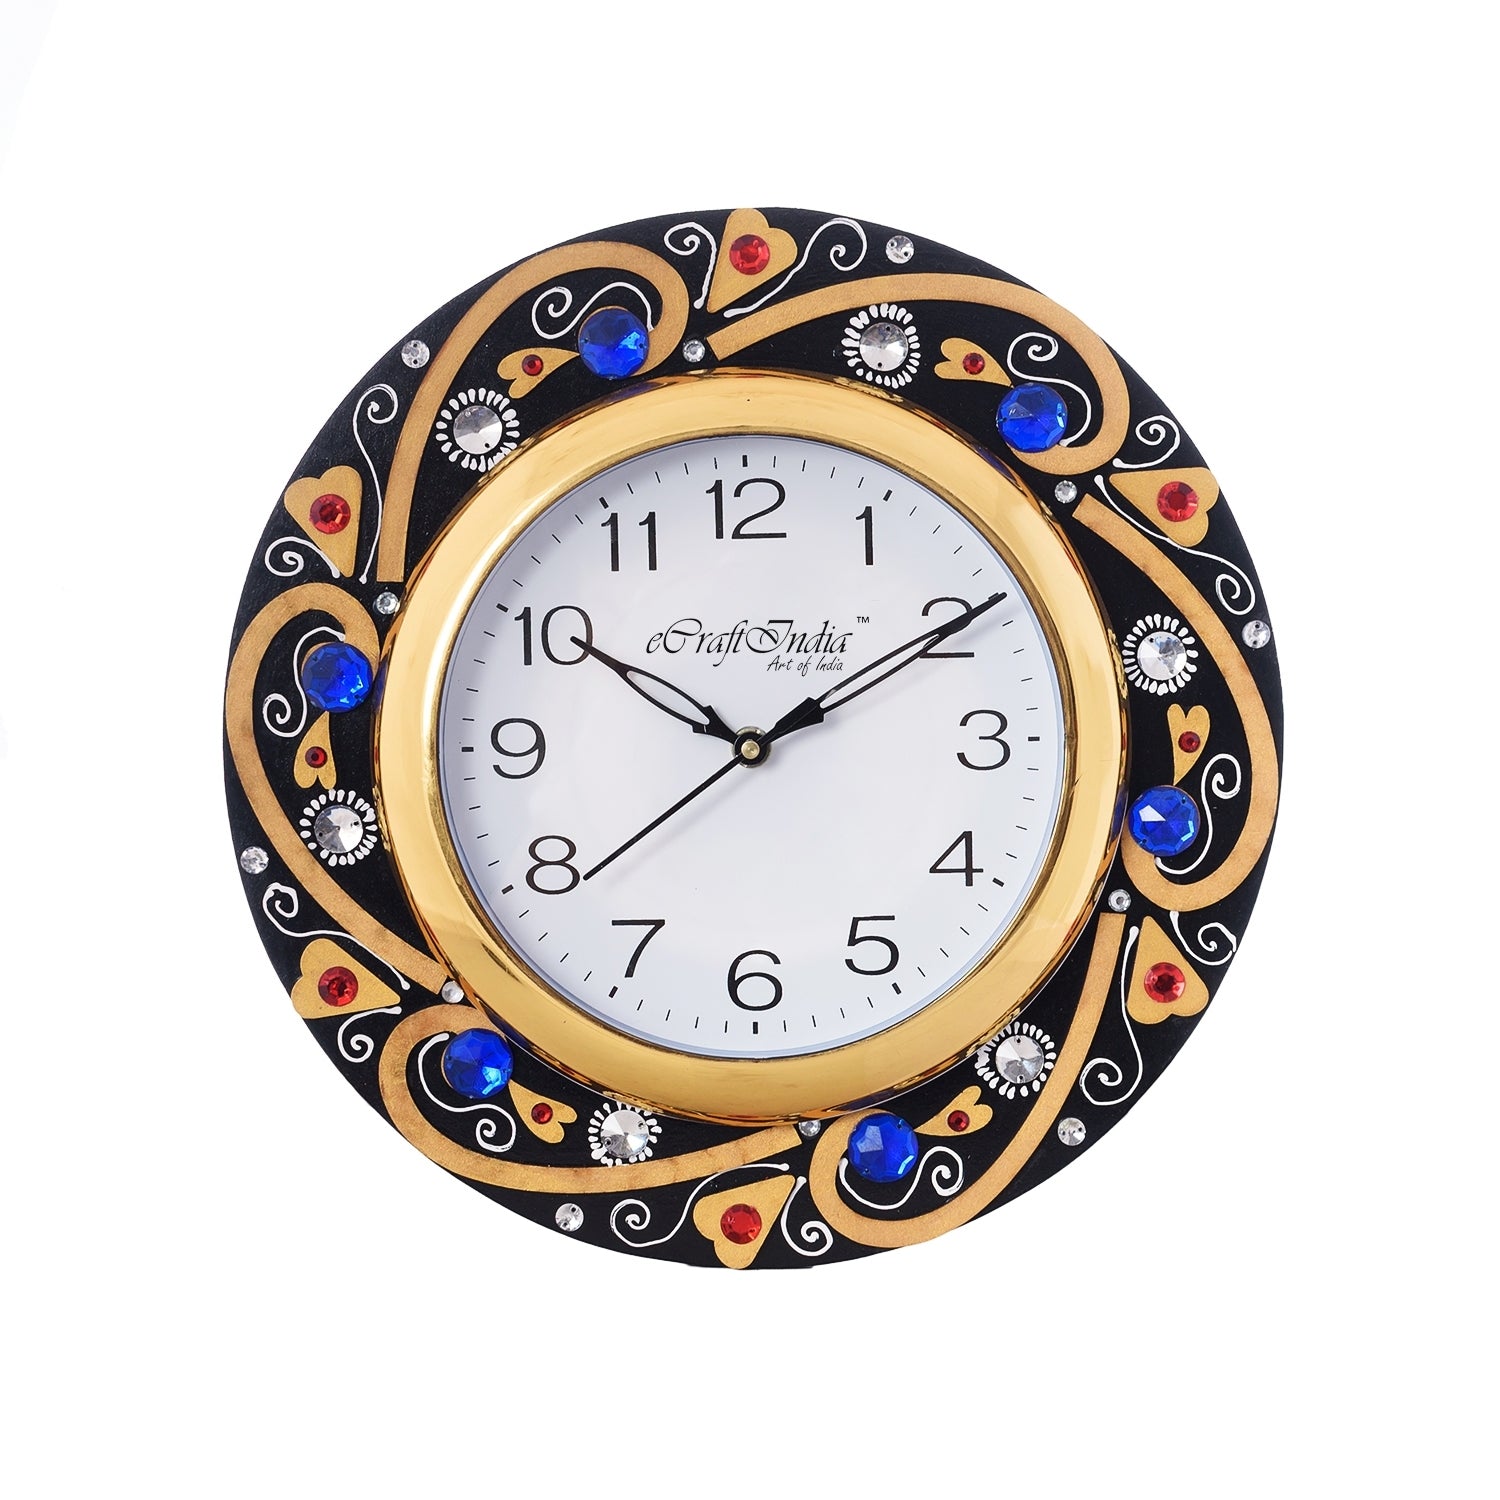 Crystal Studded Decorative Handicrafted Round Shape Papier-Mache Wooden Wall Clock